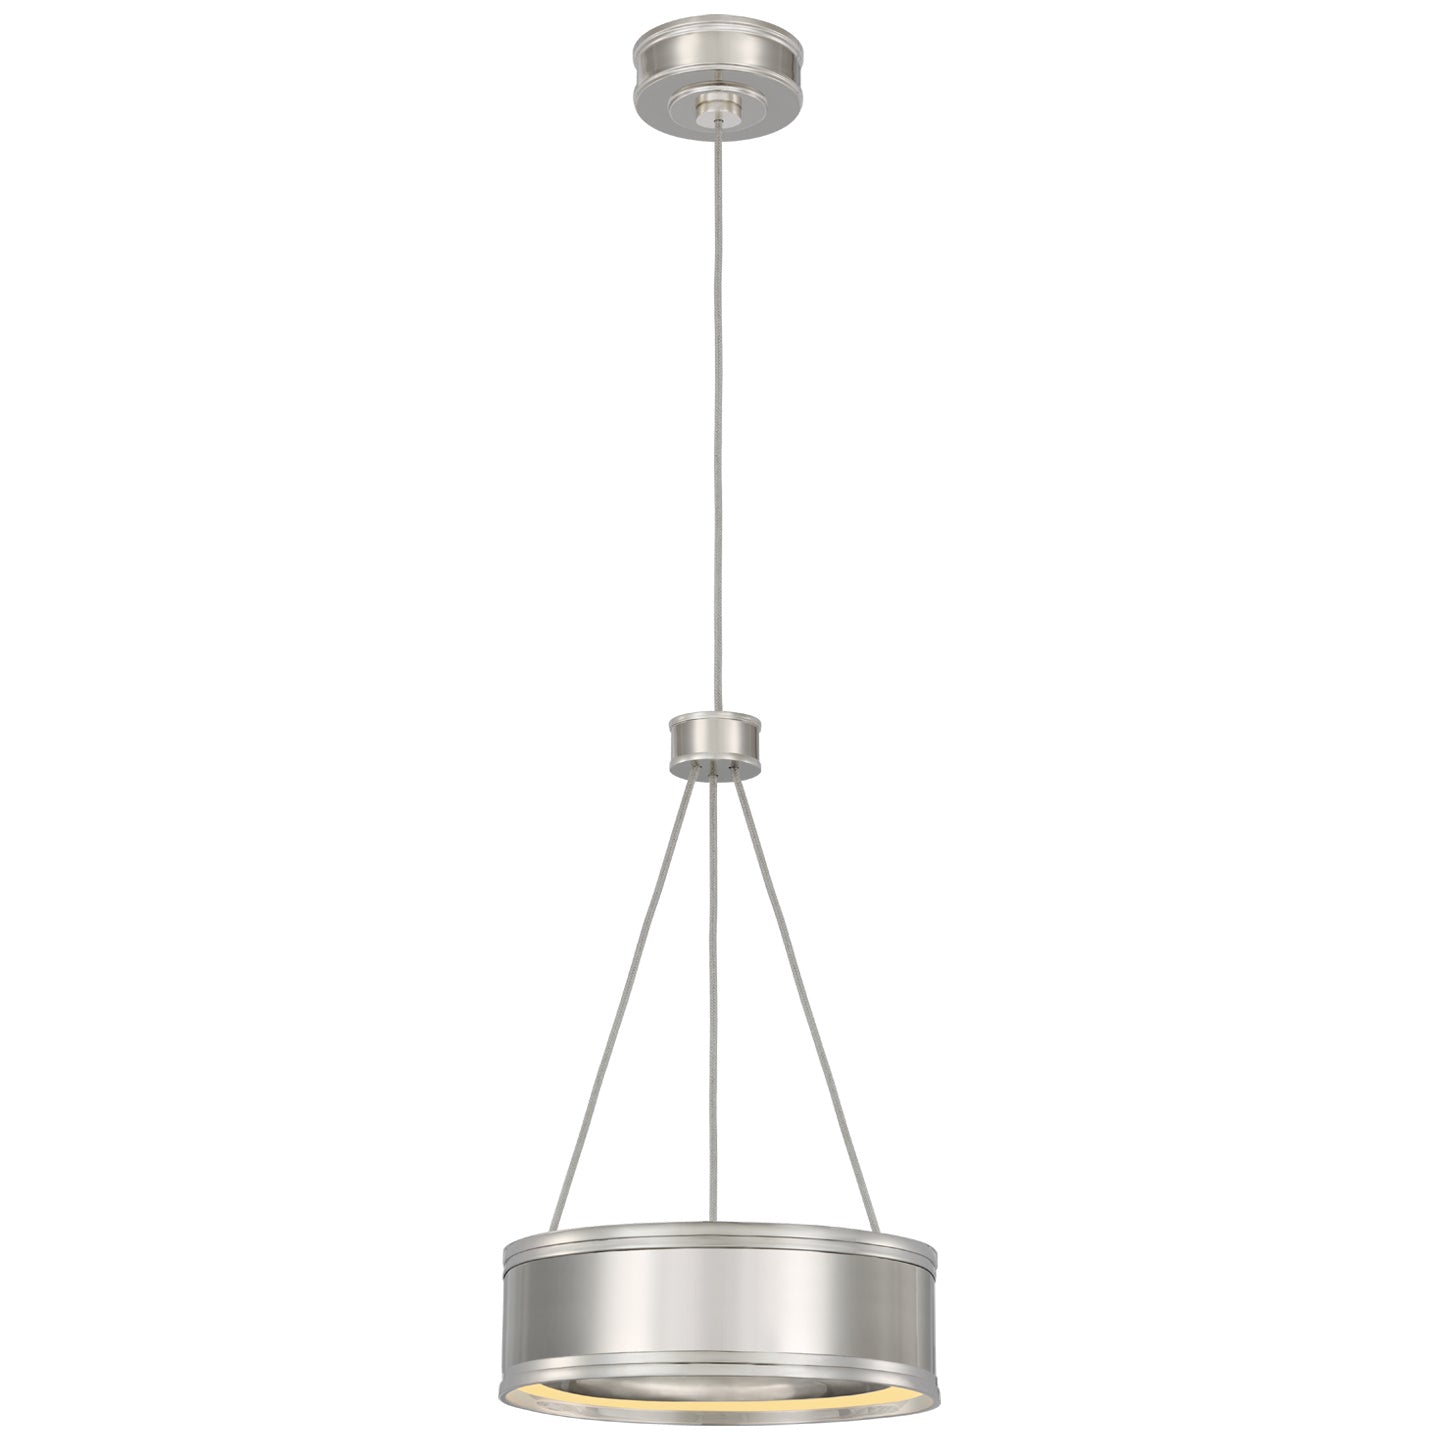 Visual Comfort Signature - CHC 1610PN - LED Pendant - Connery - Polished Nickel